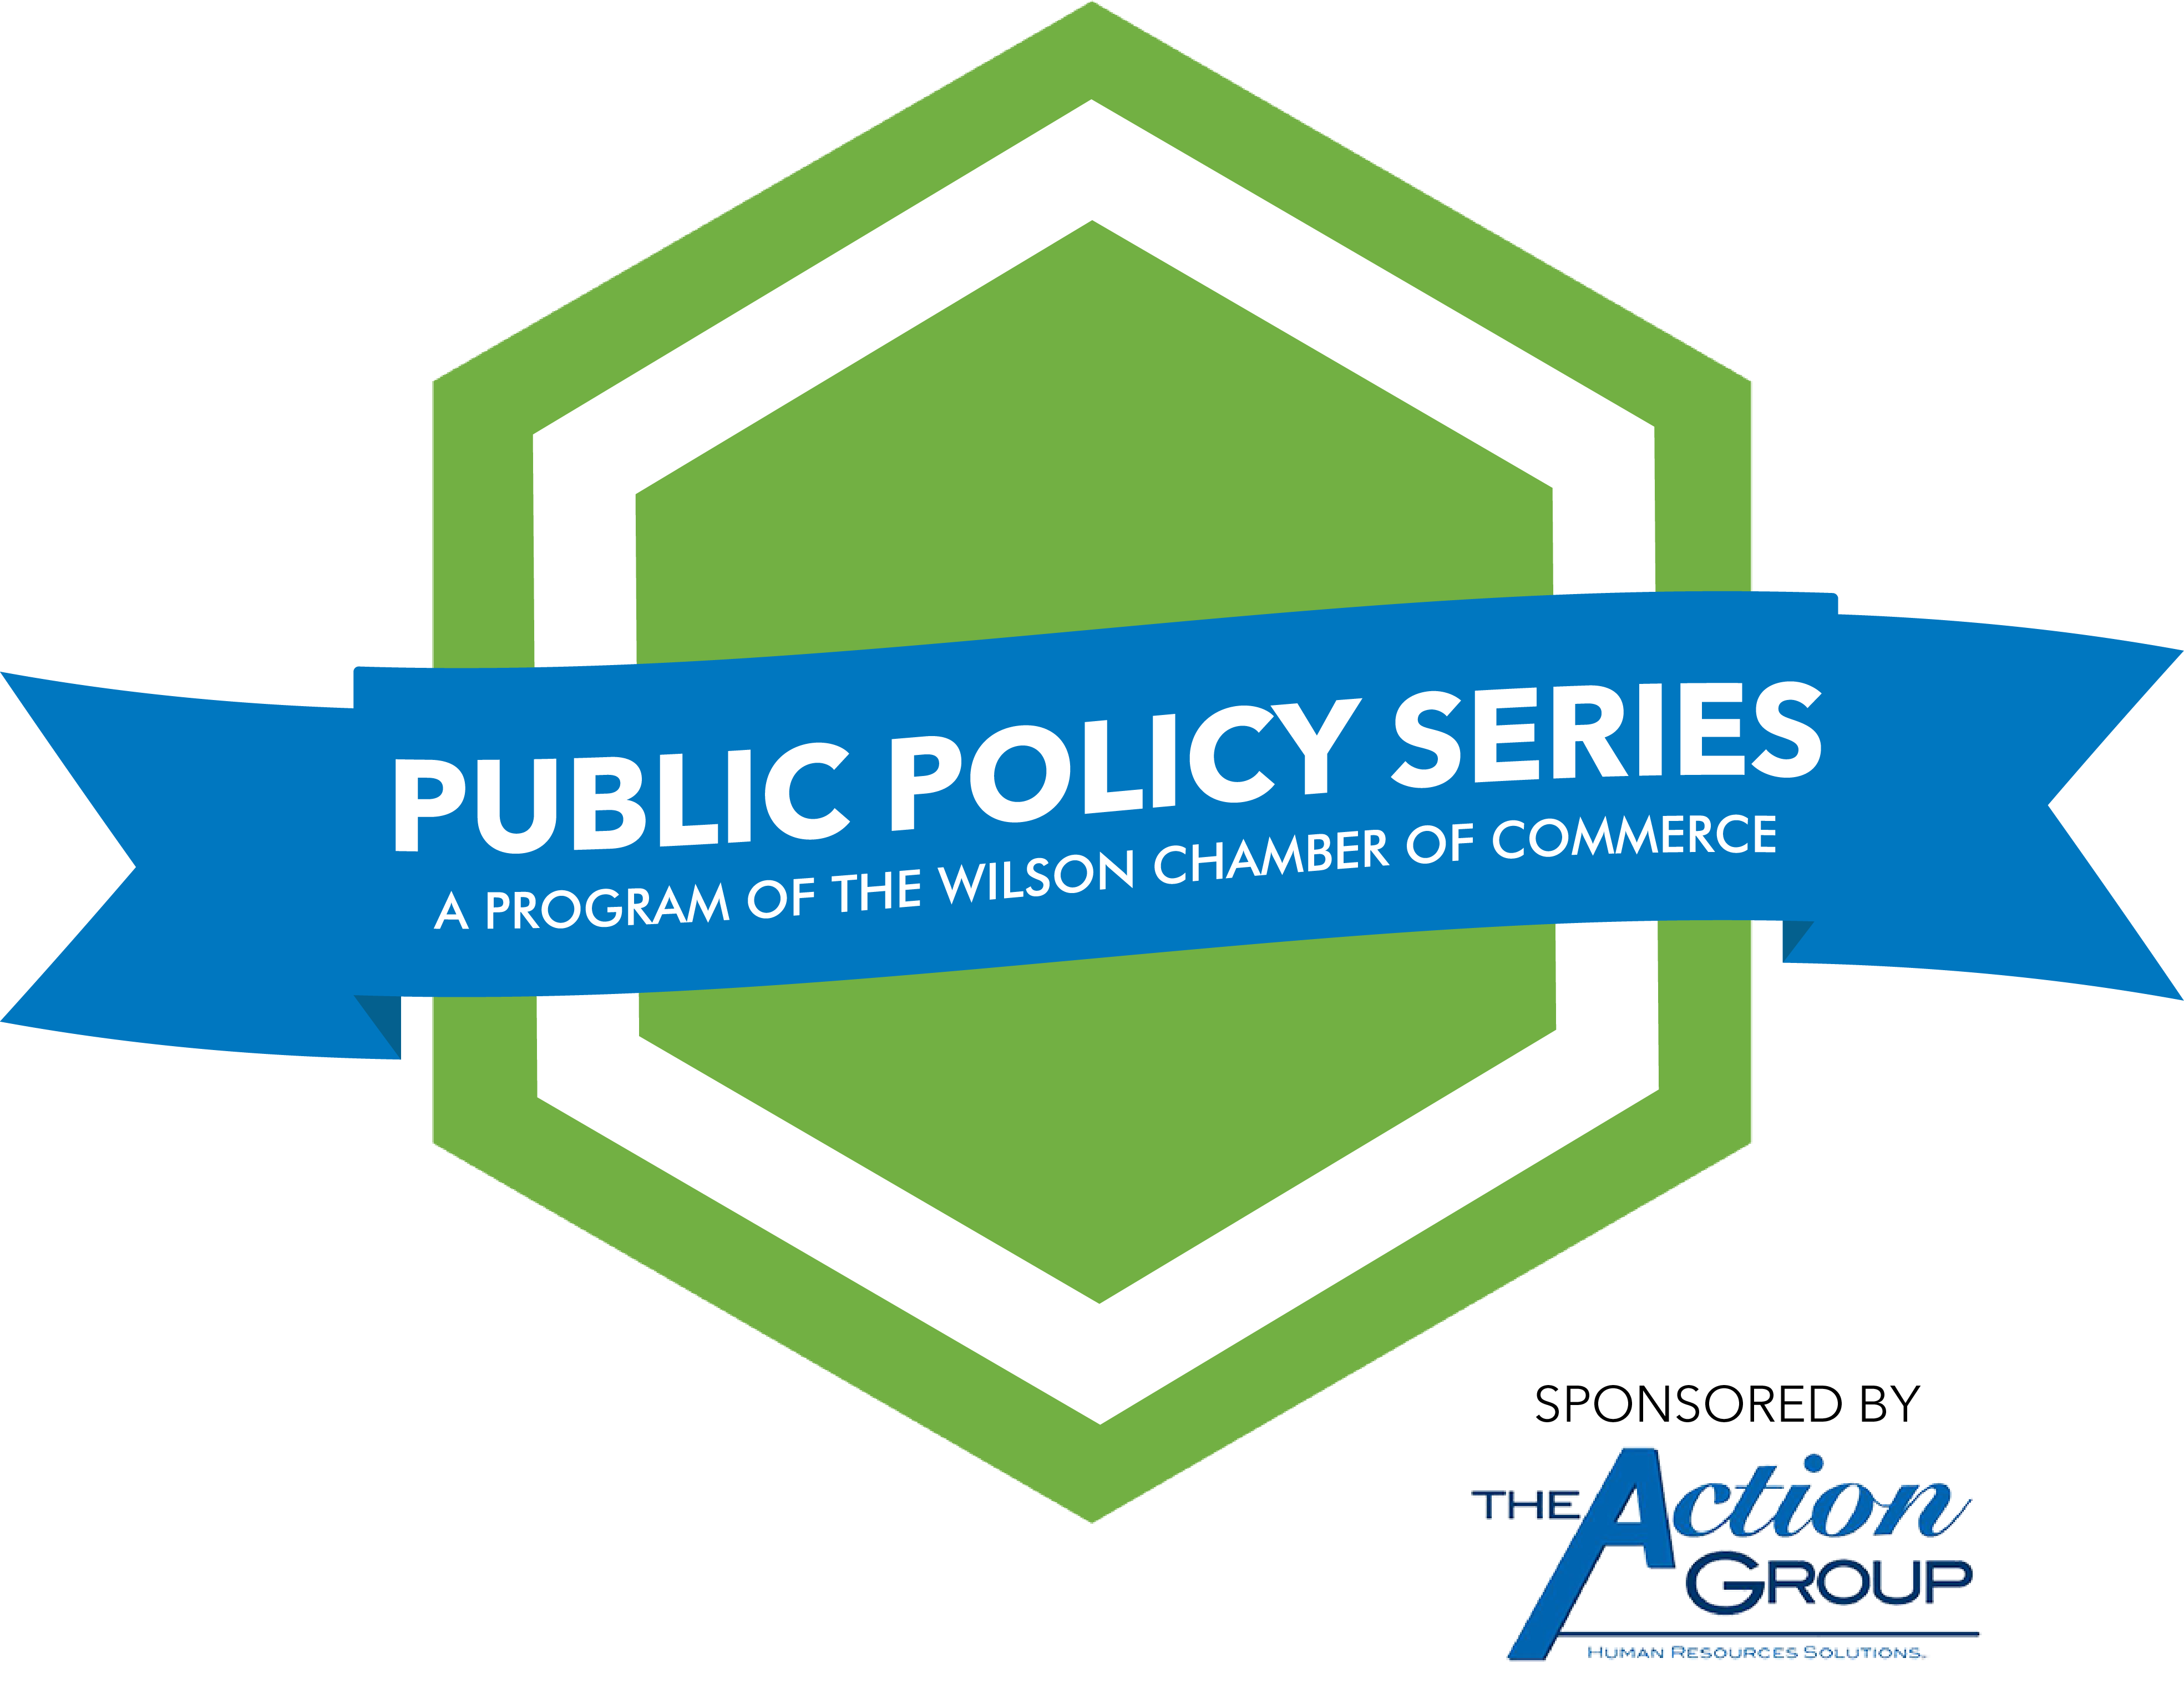 The Chamber's Public Policy Series presented by the Action Group